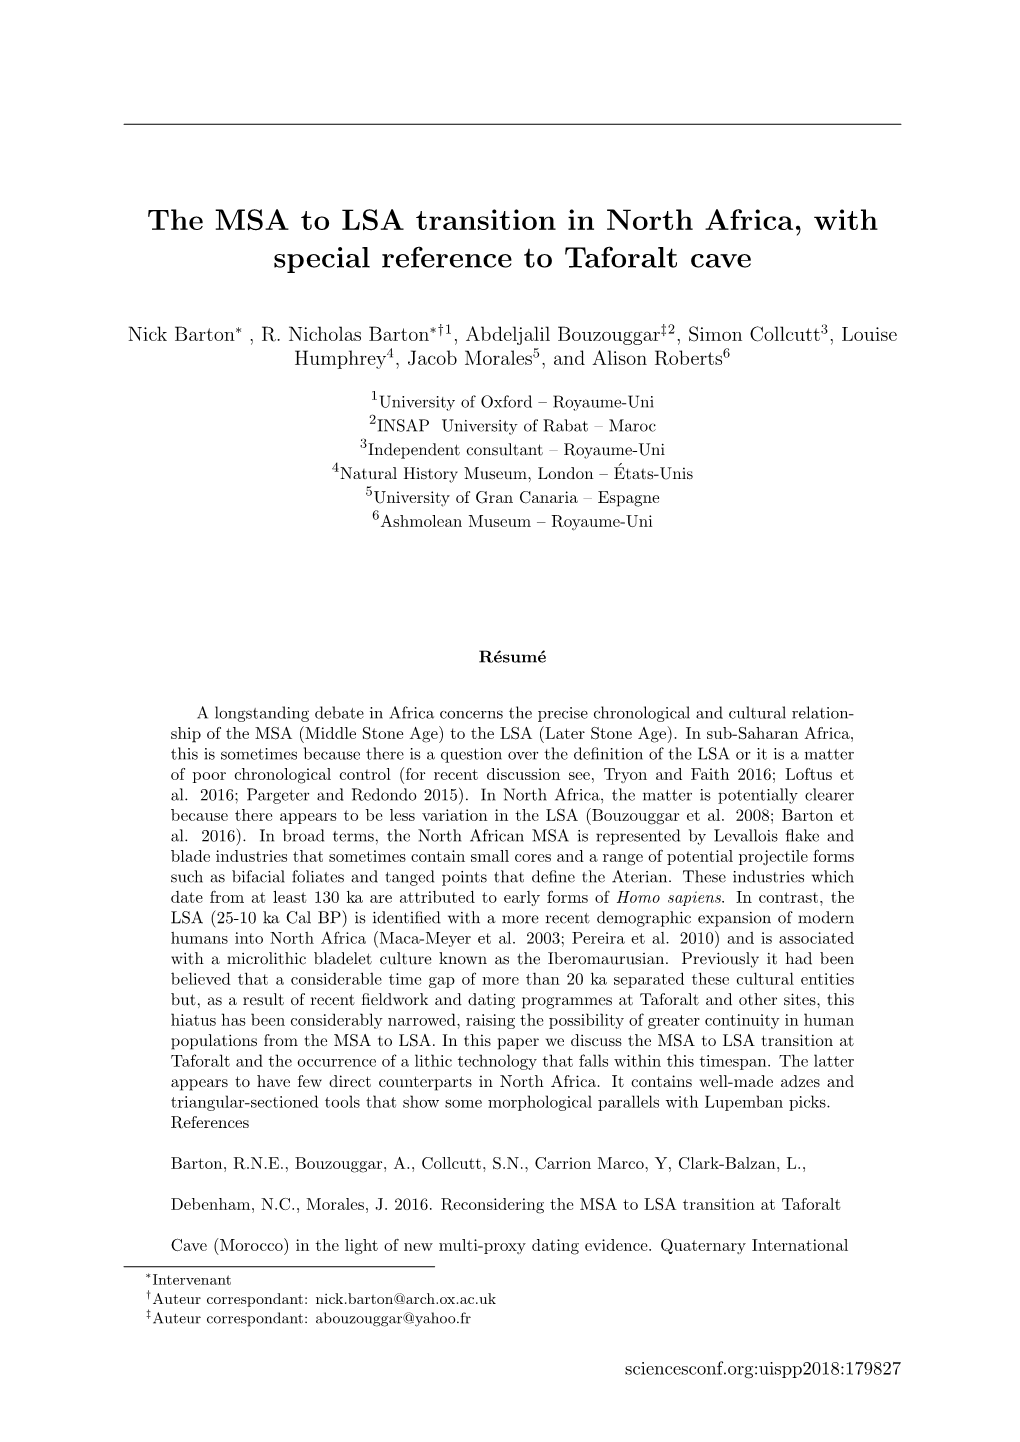 The MSA to LSA Transition in North Africa, with Special Reference to Taforalt Cave